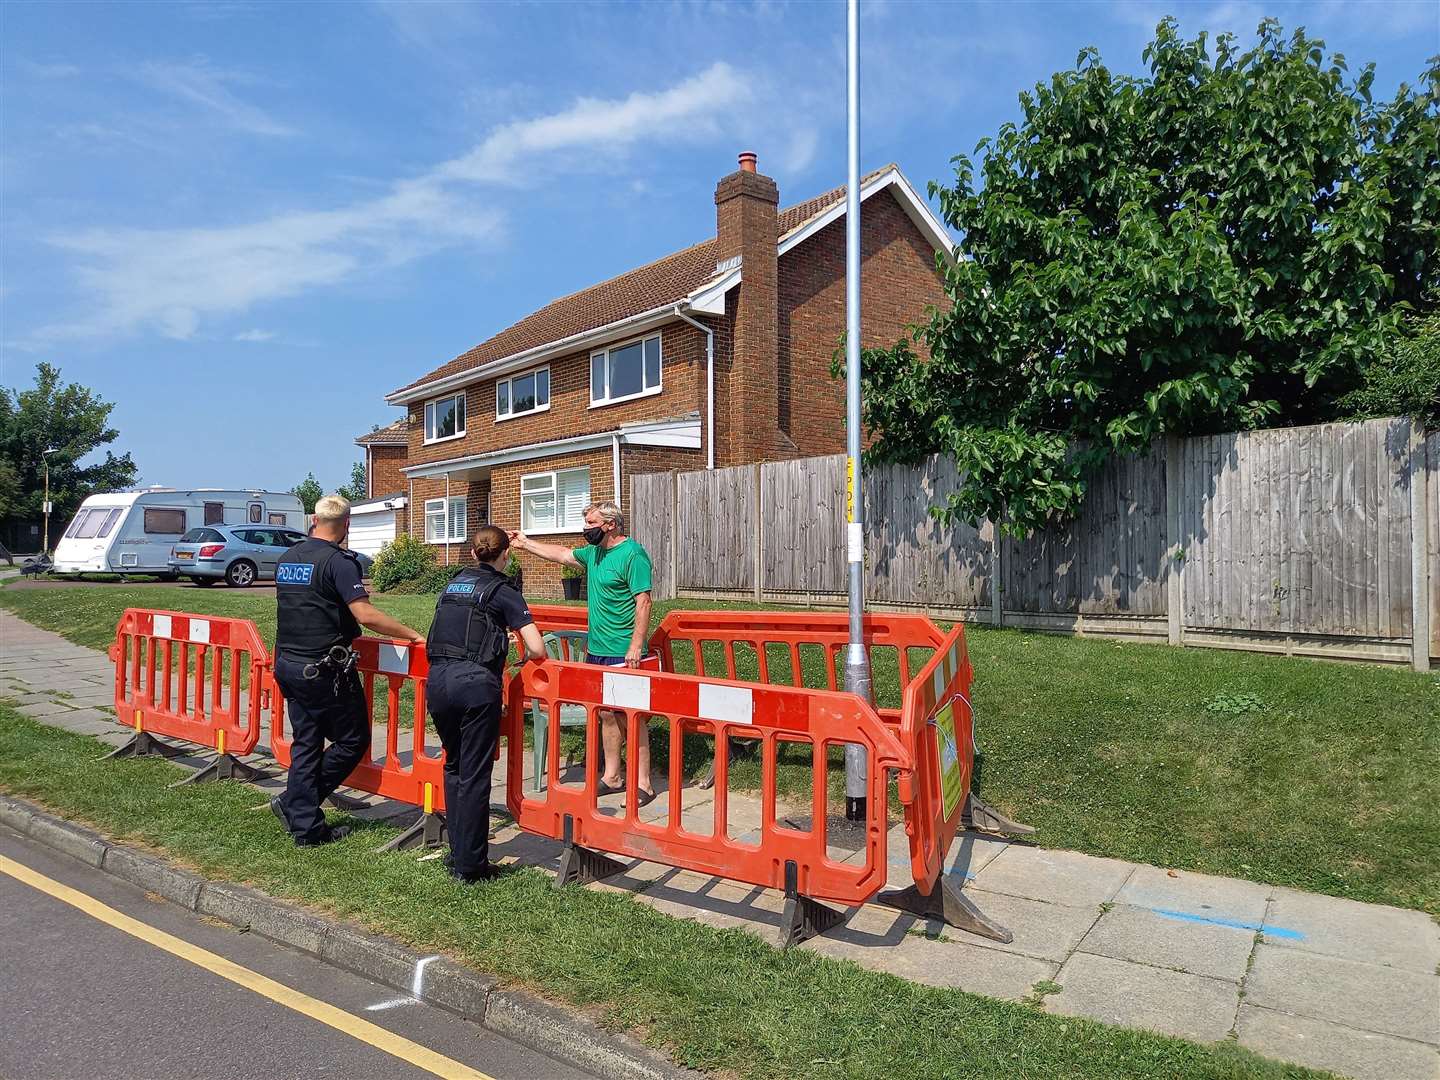 Two officers were called out to Pilgrims Way